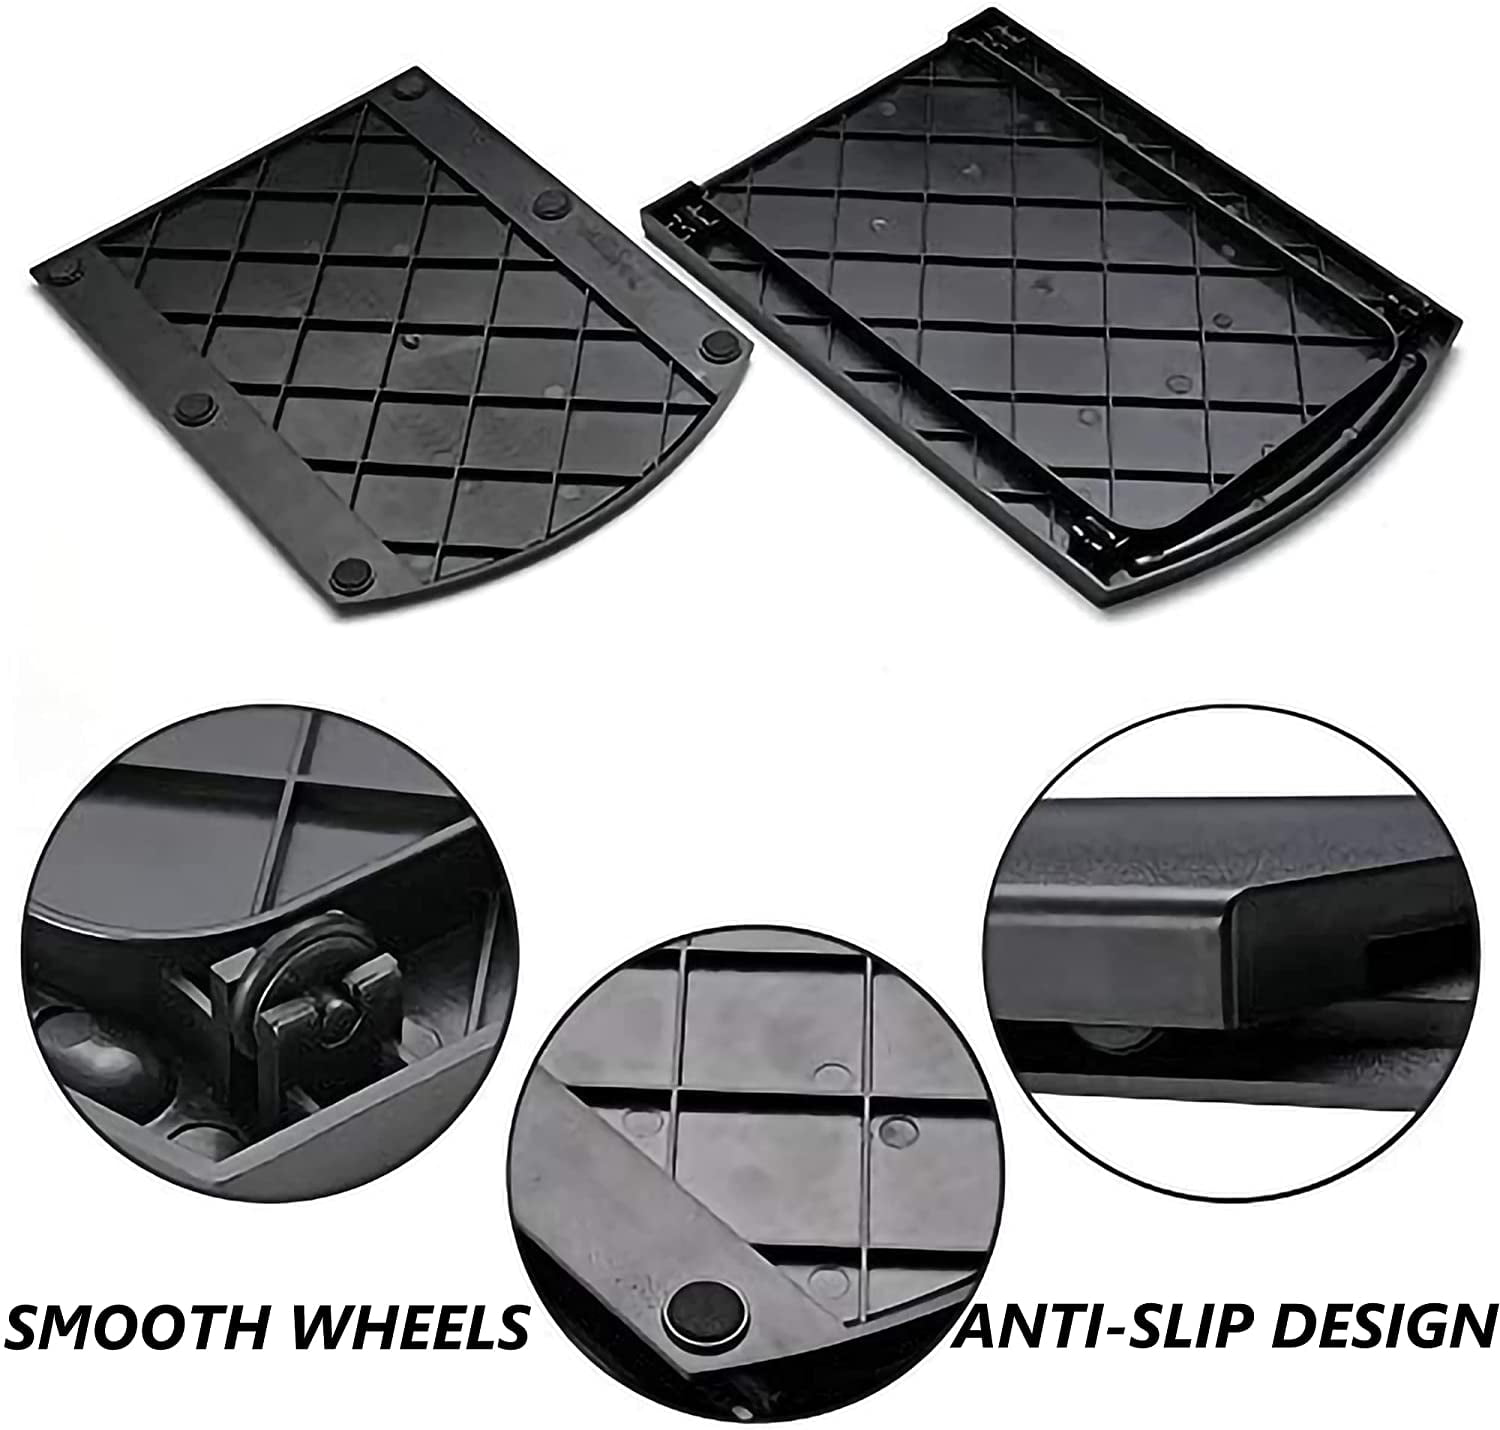 AMQTSLM Coffee Maker Mat for Countertops Fit for Keurig Coffee Maker,Coffee  Maker Slider for Counter,Appliance Sliders for Kitchen Appliances, Counter  Slider for Coffee Maker 